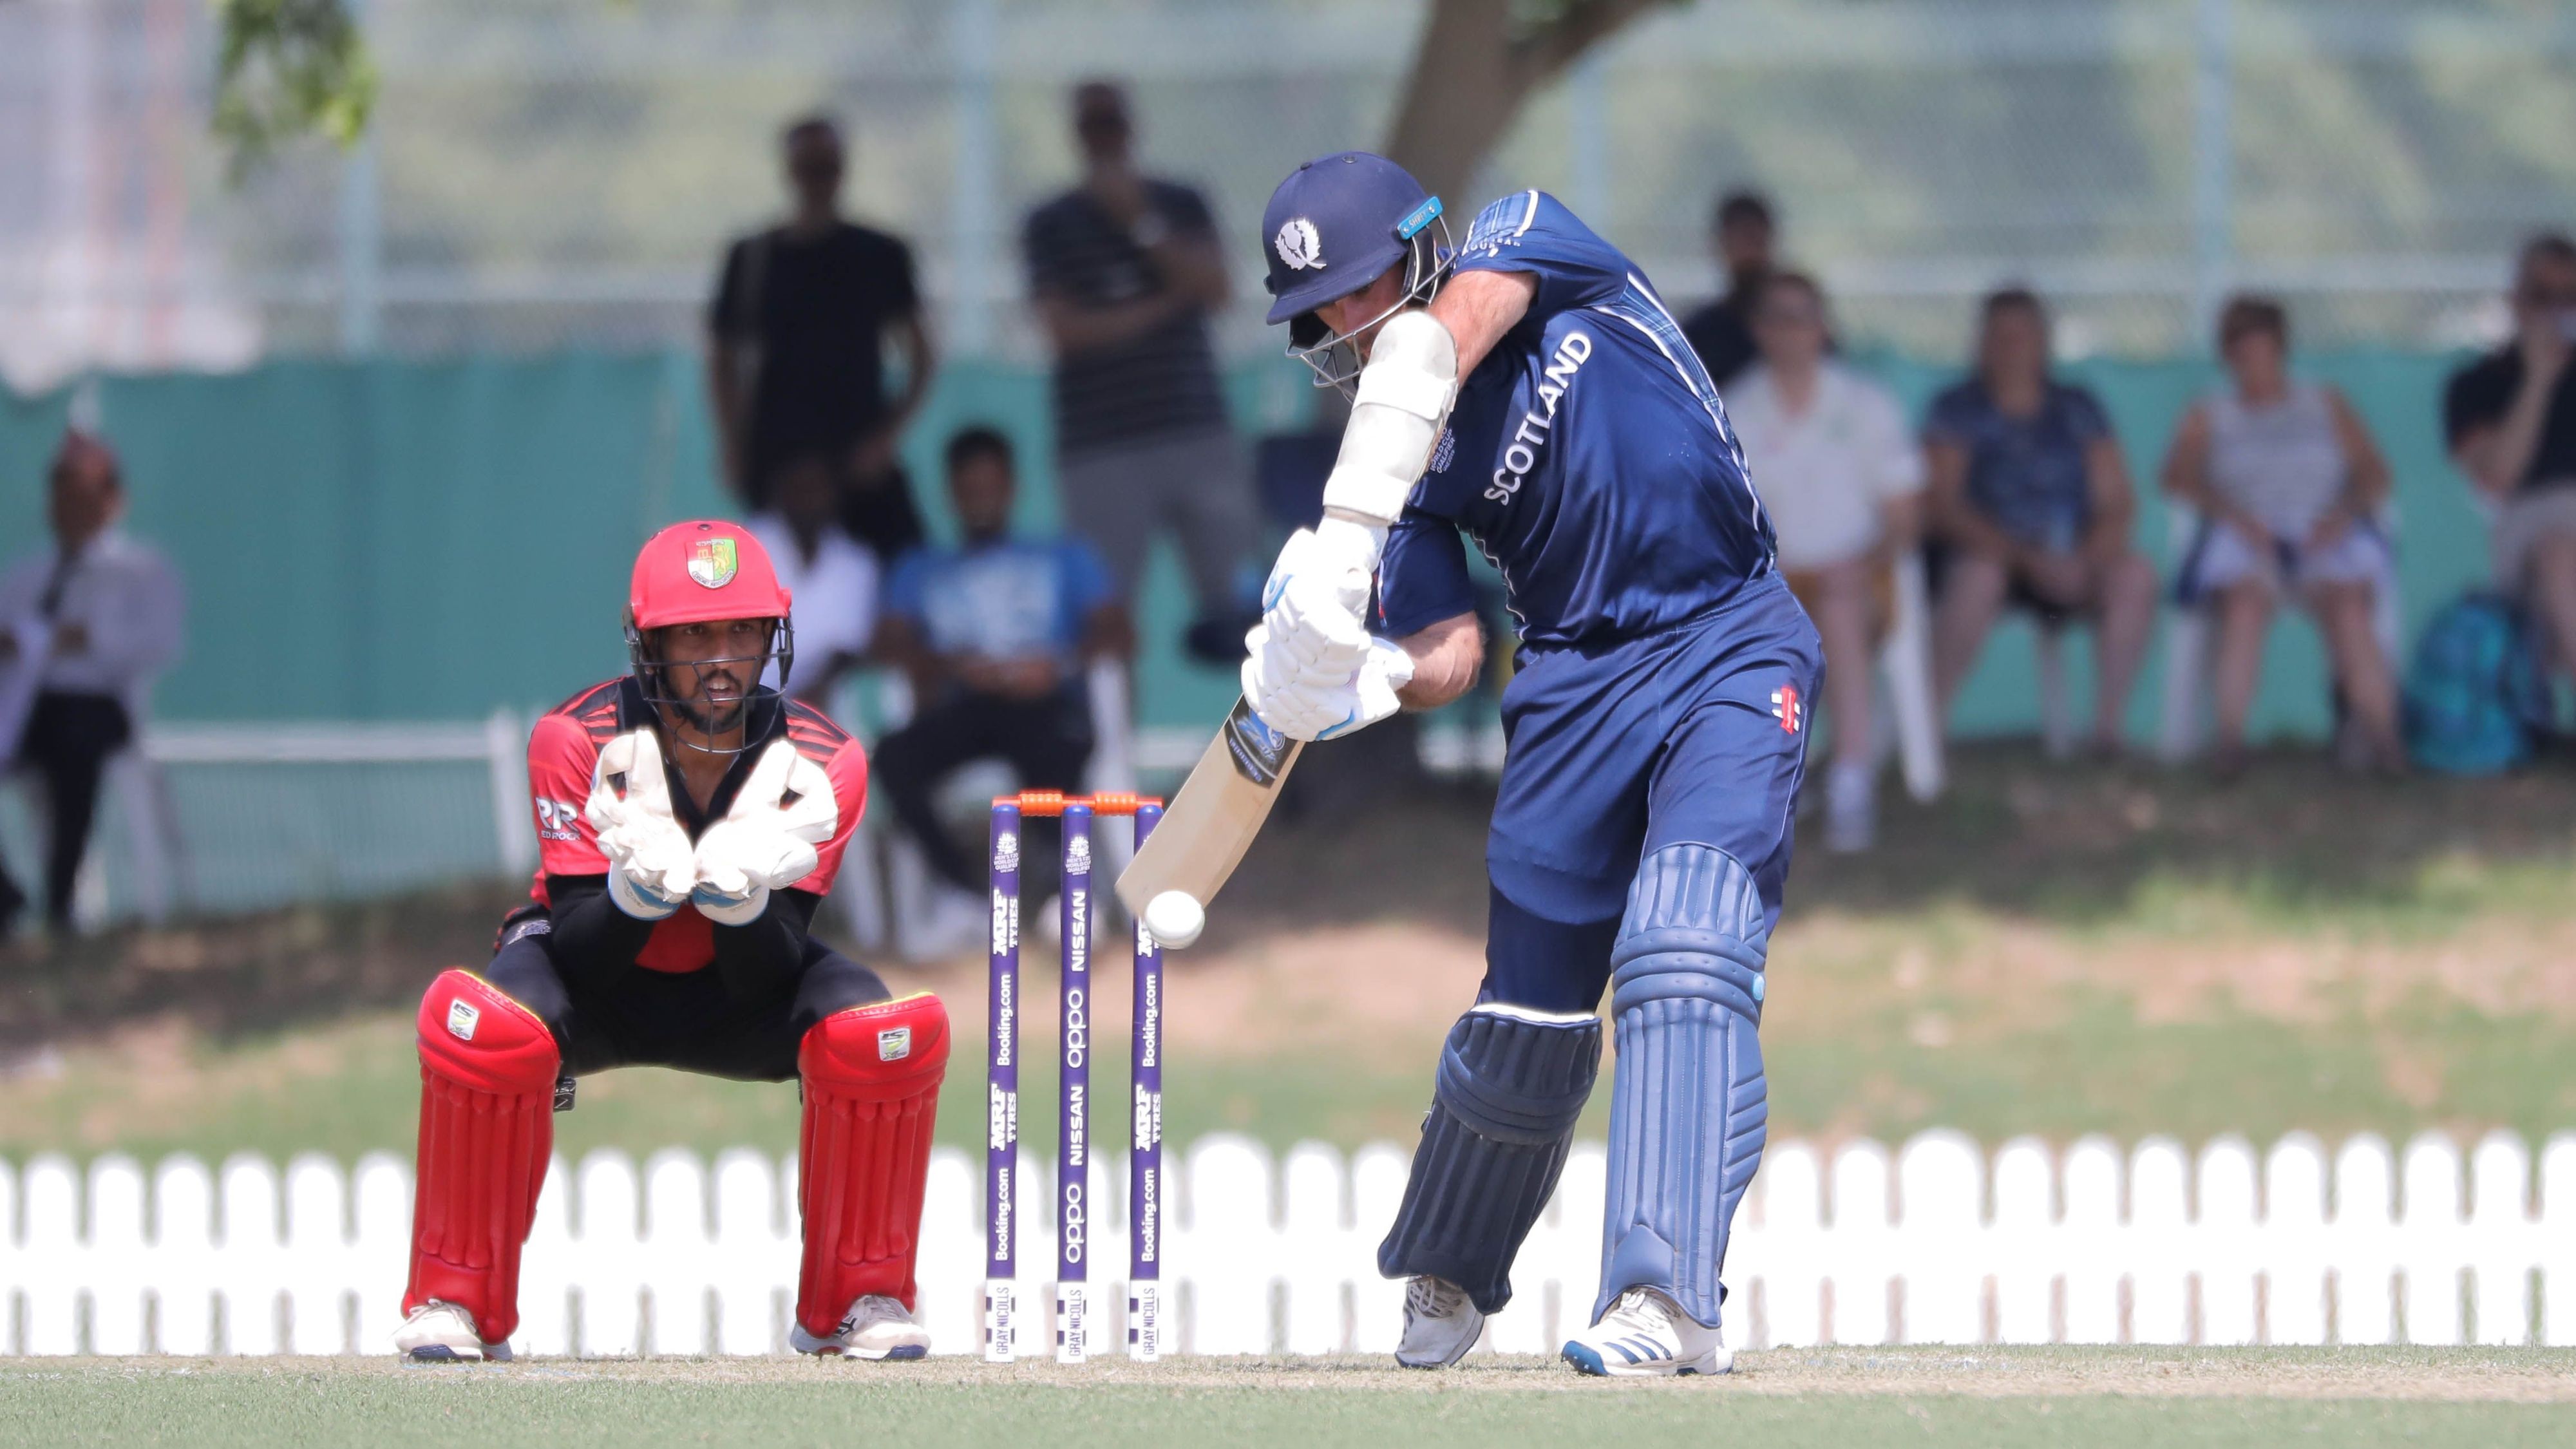 Scotland open T20 World Cup campaign with 2-run loss to Singapore